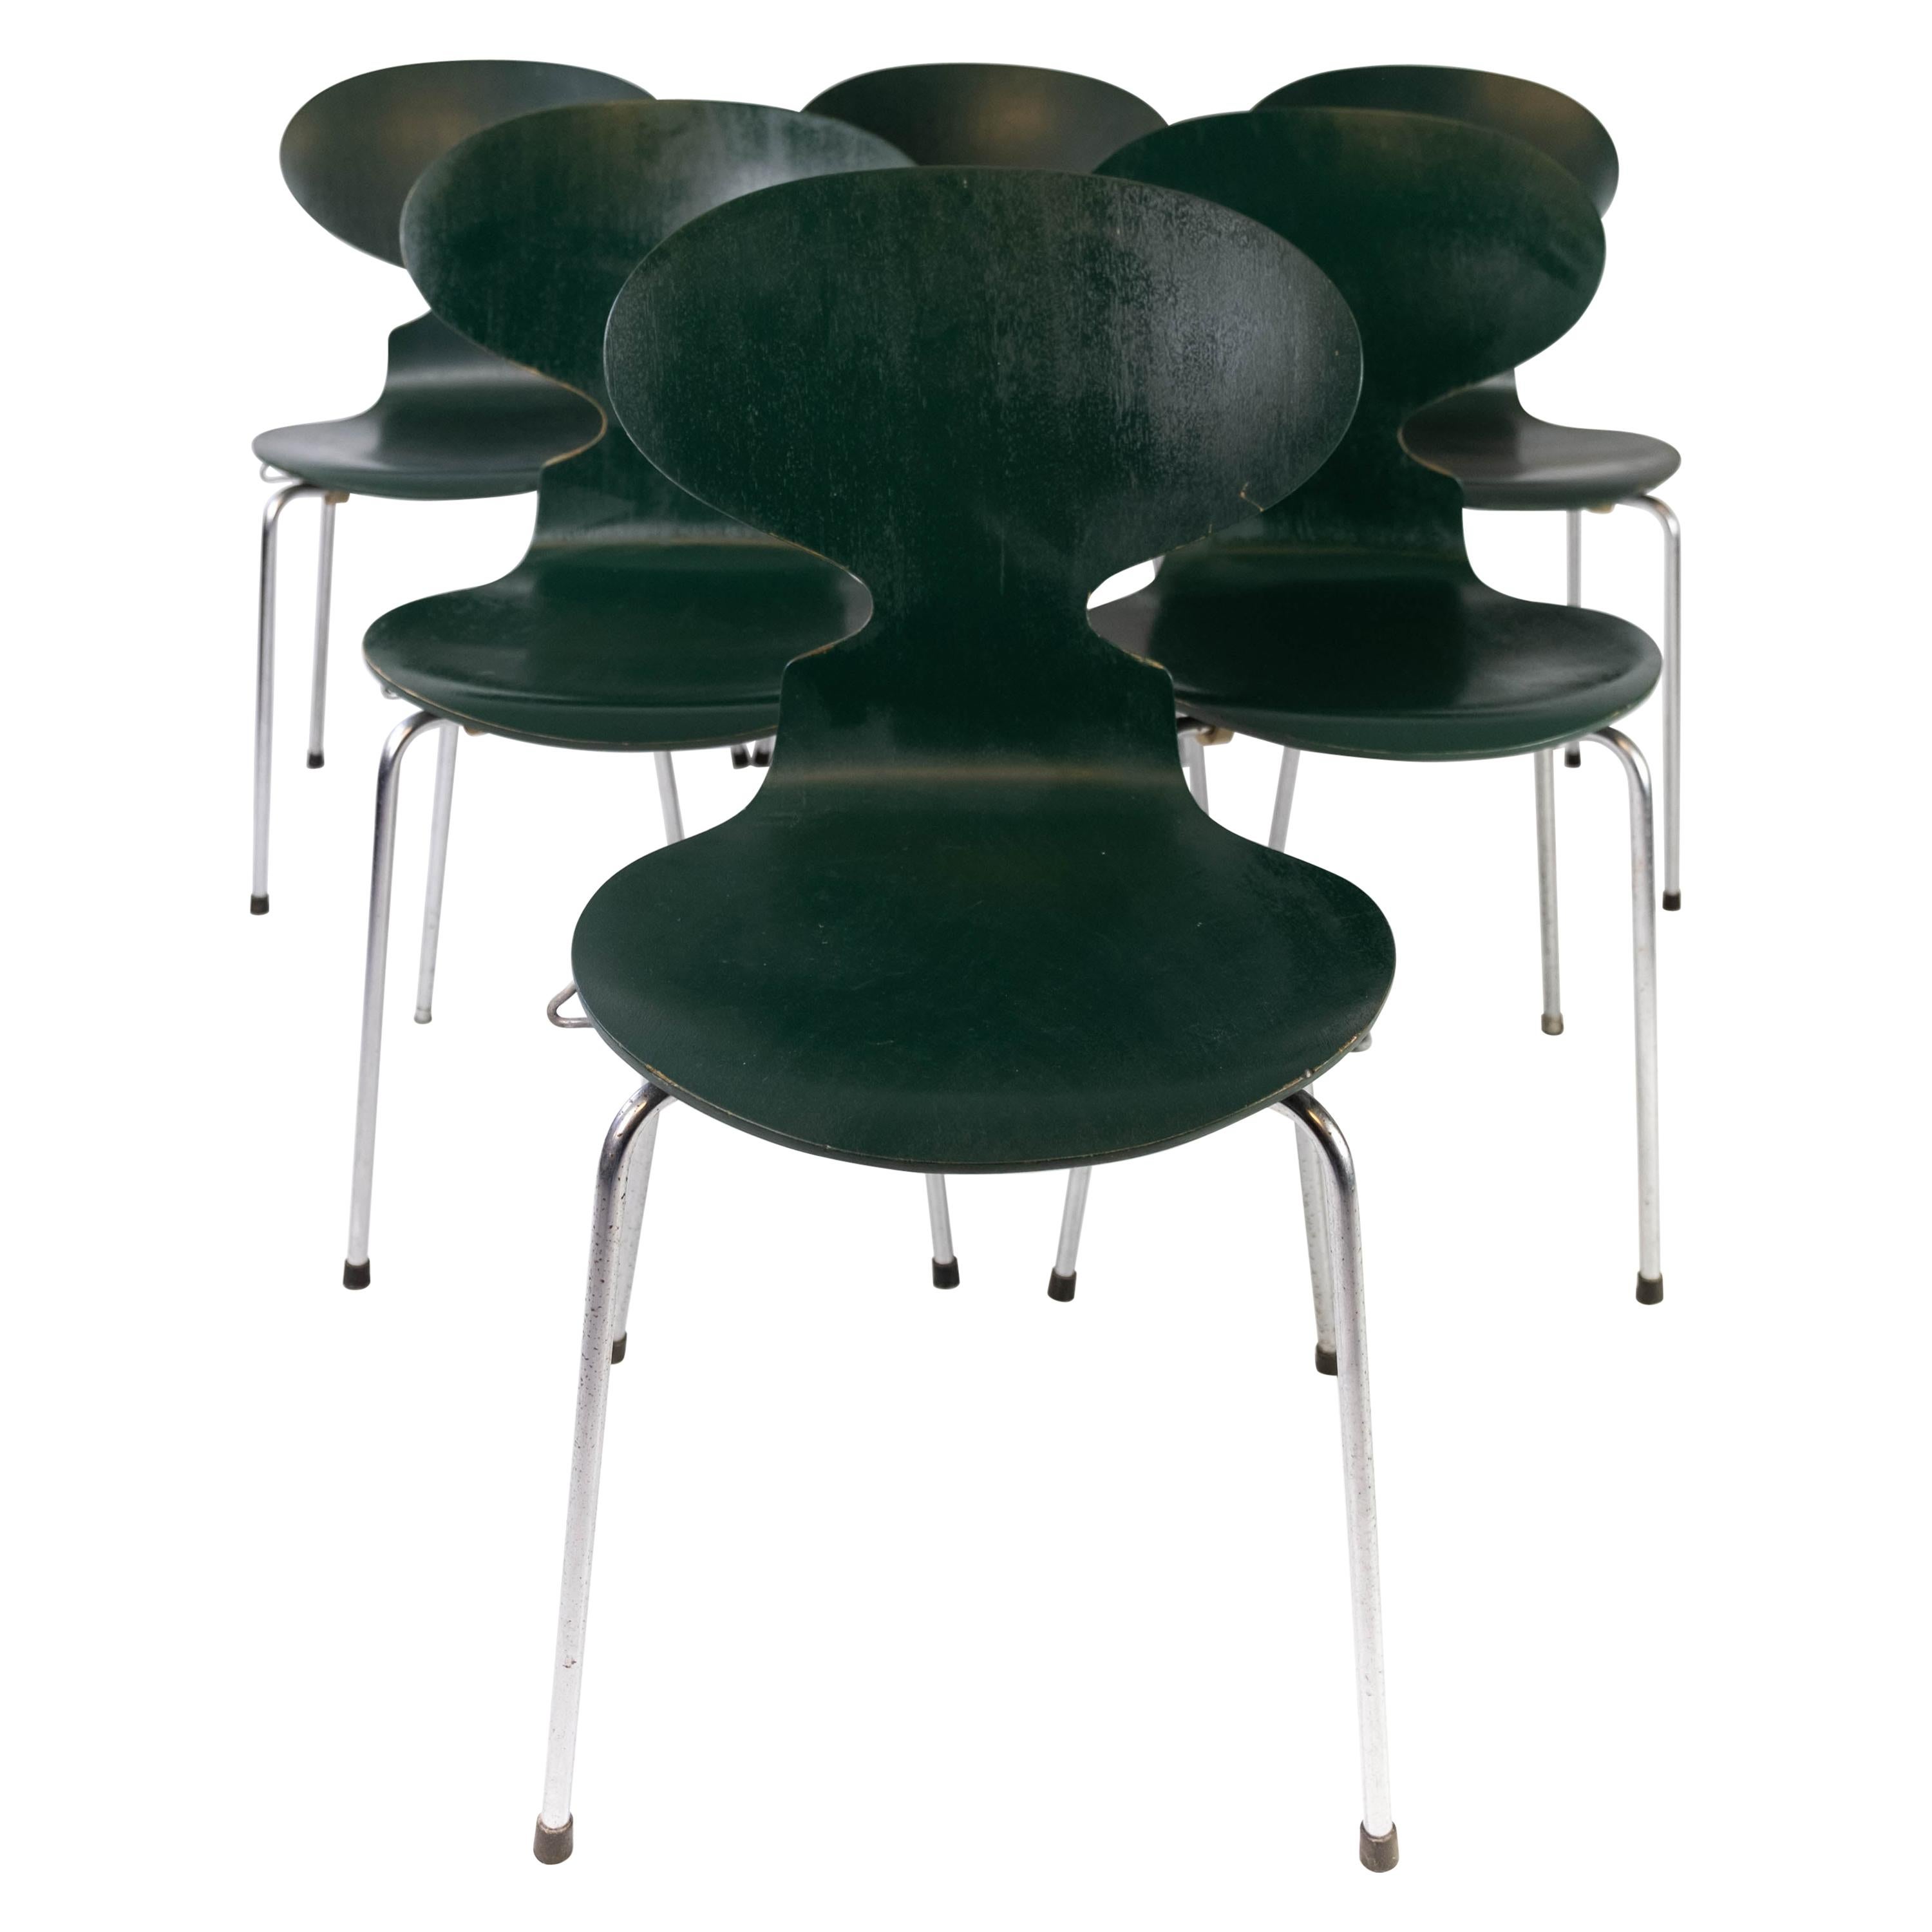 Set of Five Dark Green Ant Chairs, Model 3101, Designed by Arne Jacobsen, 1960s